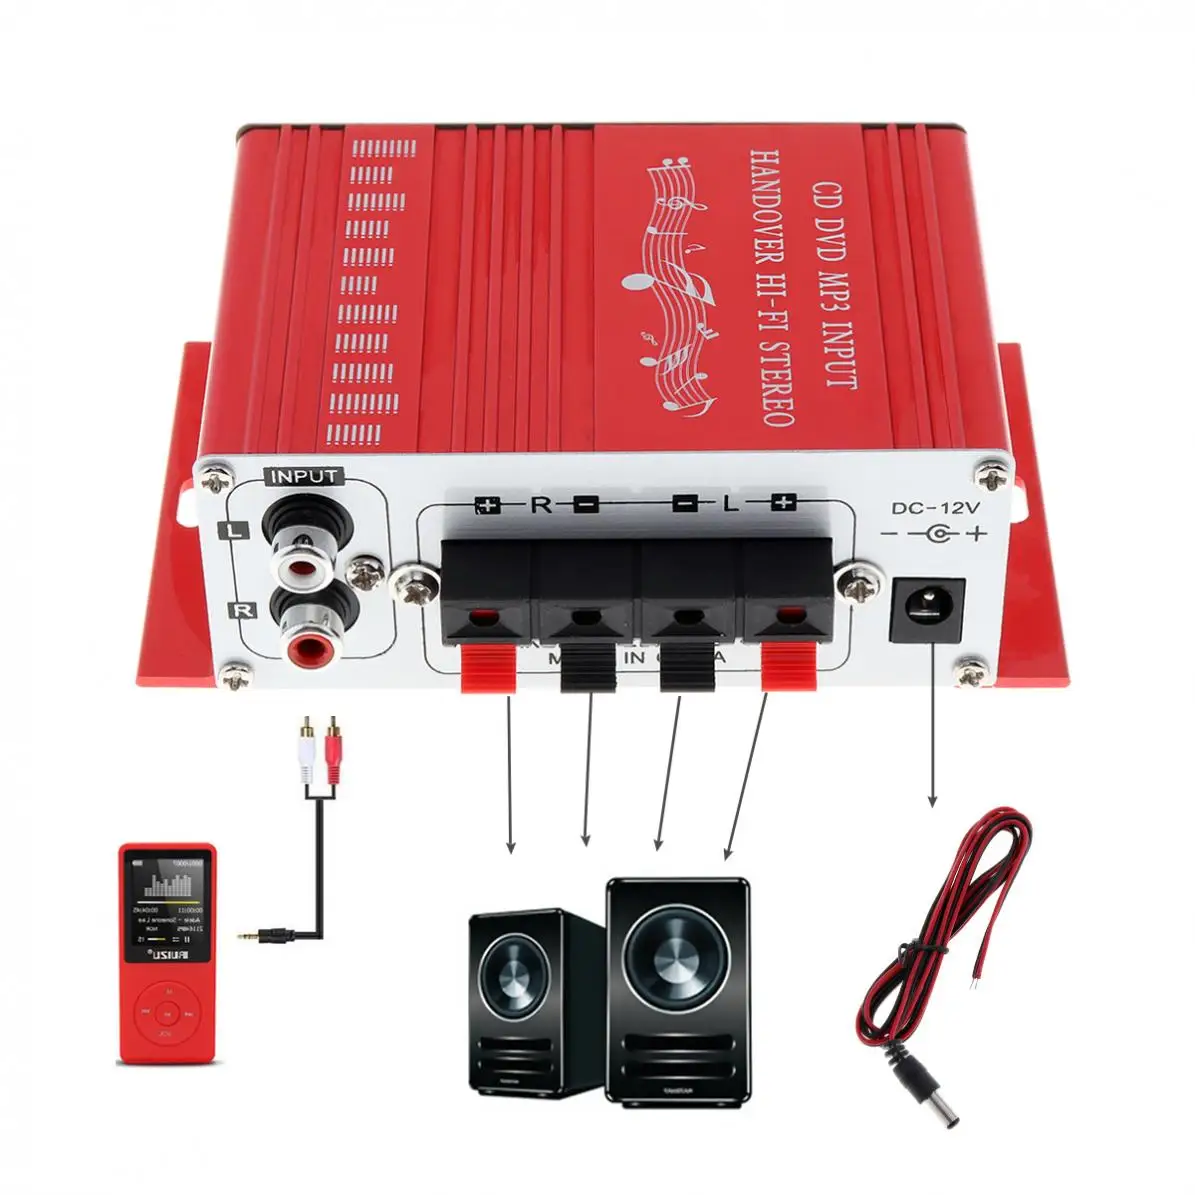 mp3 player RED Model: EN4R motorcycle scooter DRALL INSTRUMENTS Mini power amplifier for Flats car 